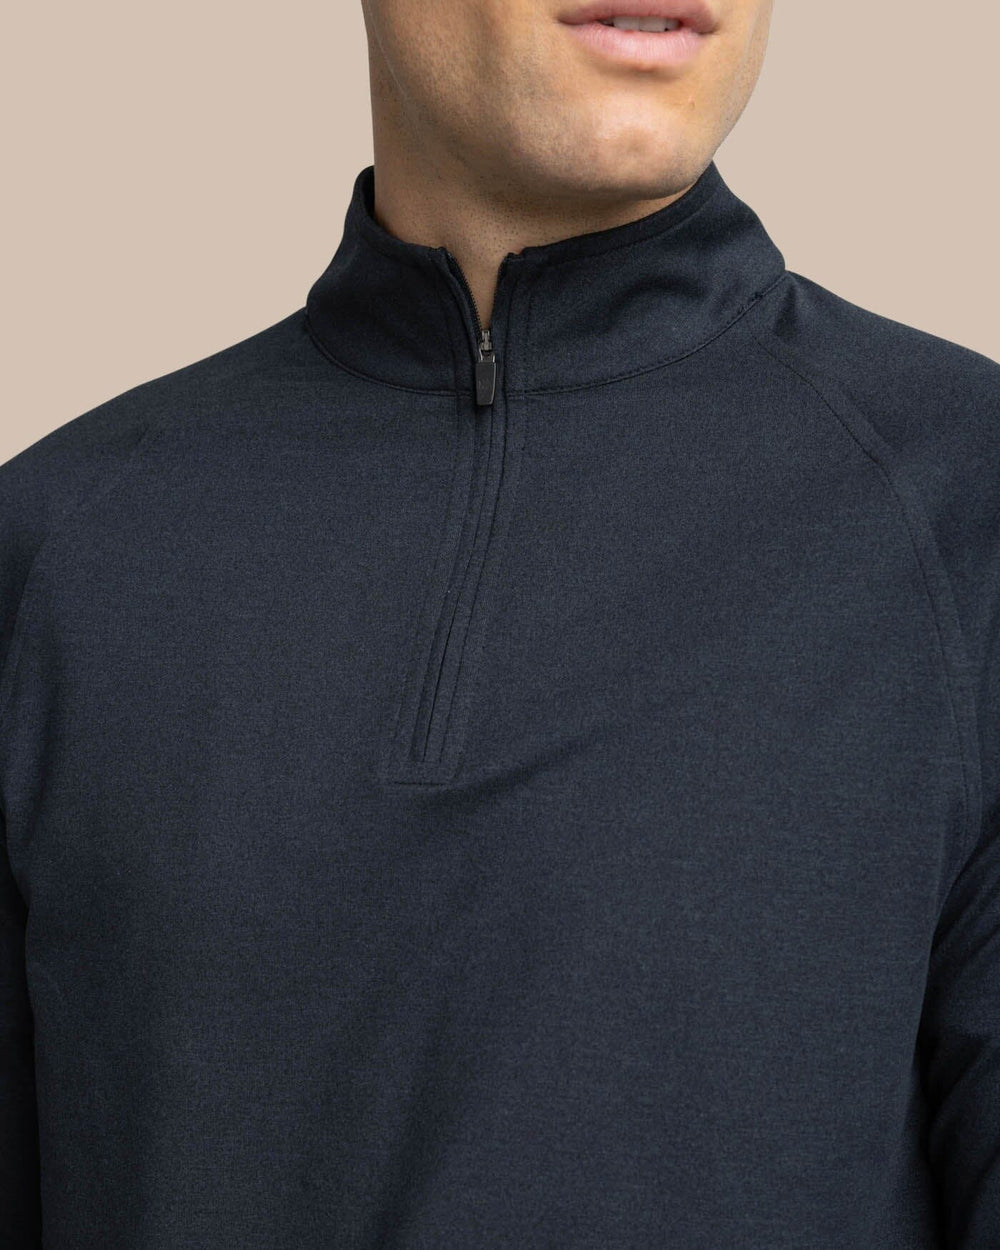 The detail view of the Southern Tide Cruiser Heather Quarter Zip Pullover by Southern Tide - Heather Caviar Black